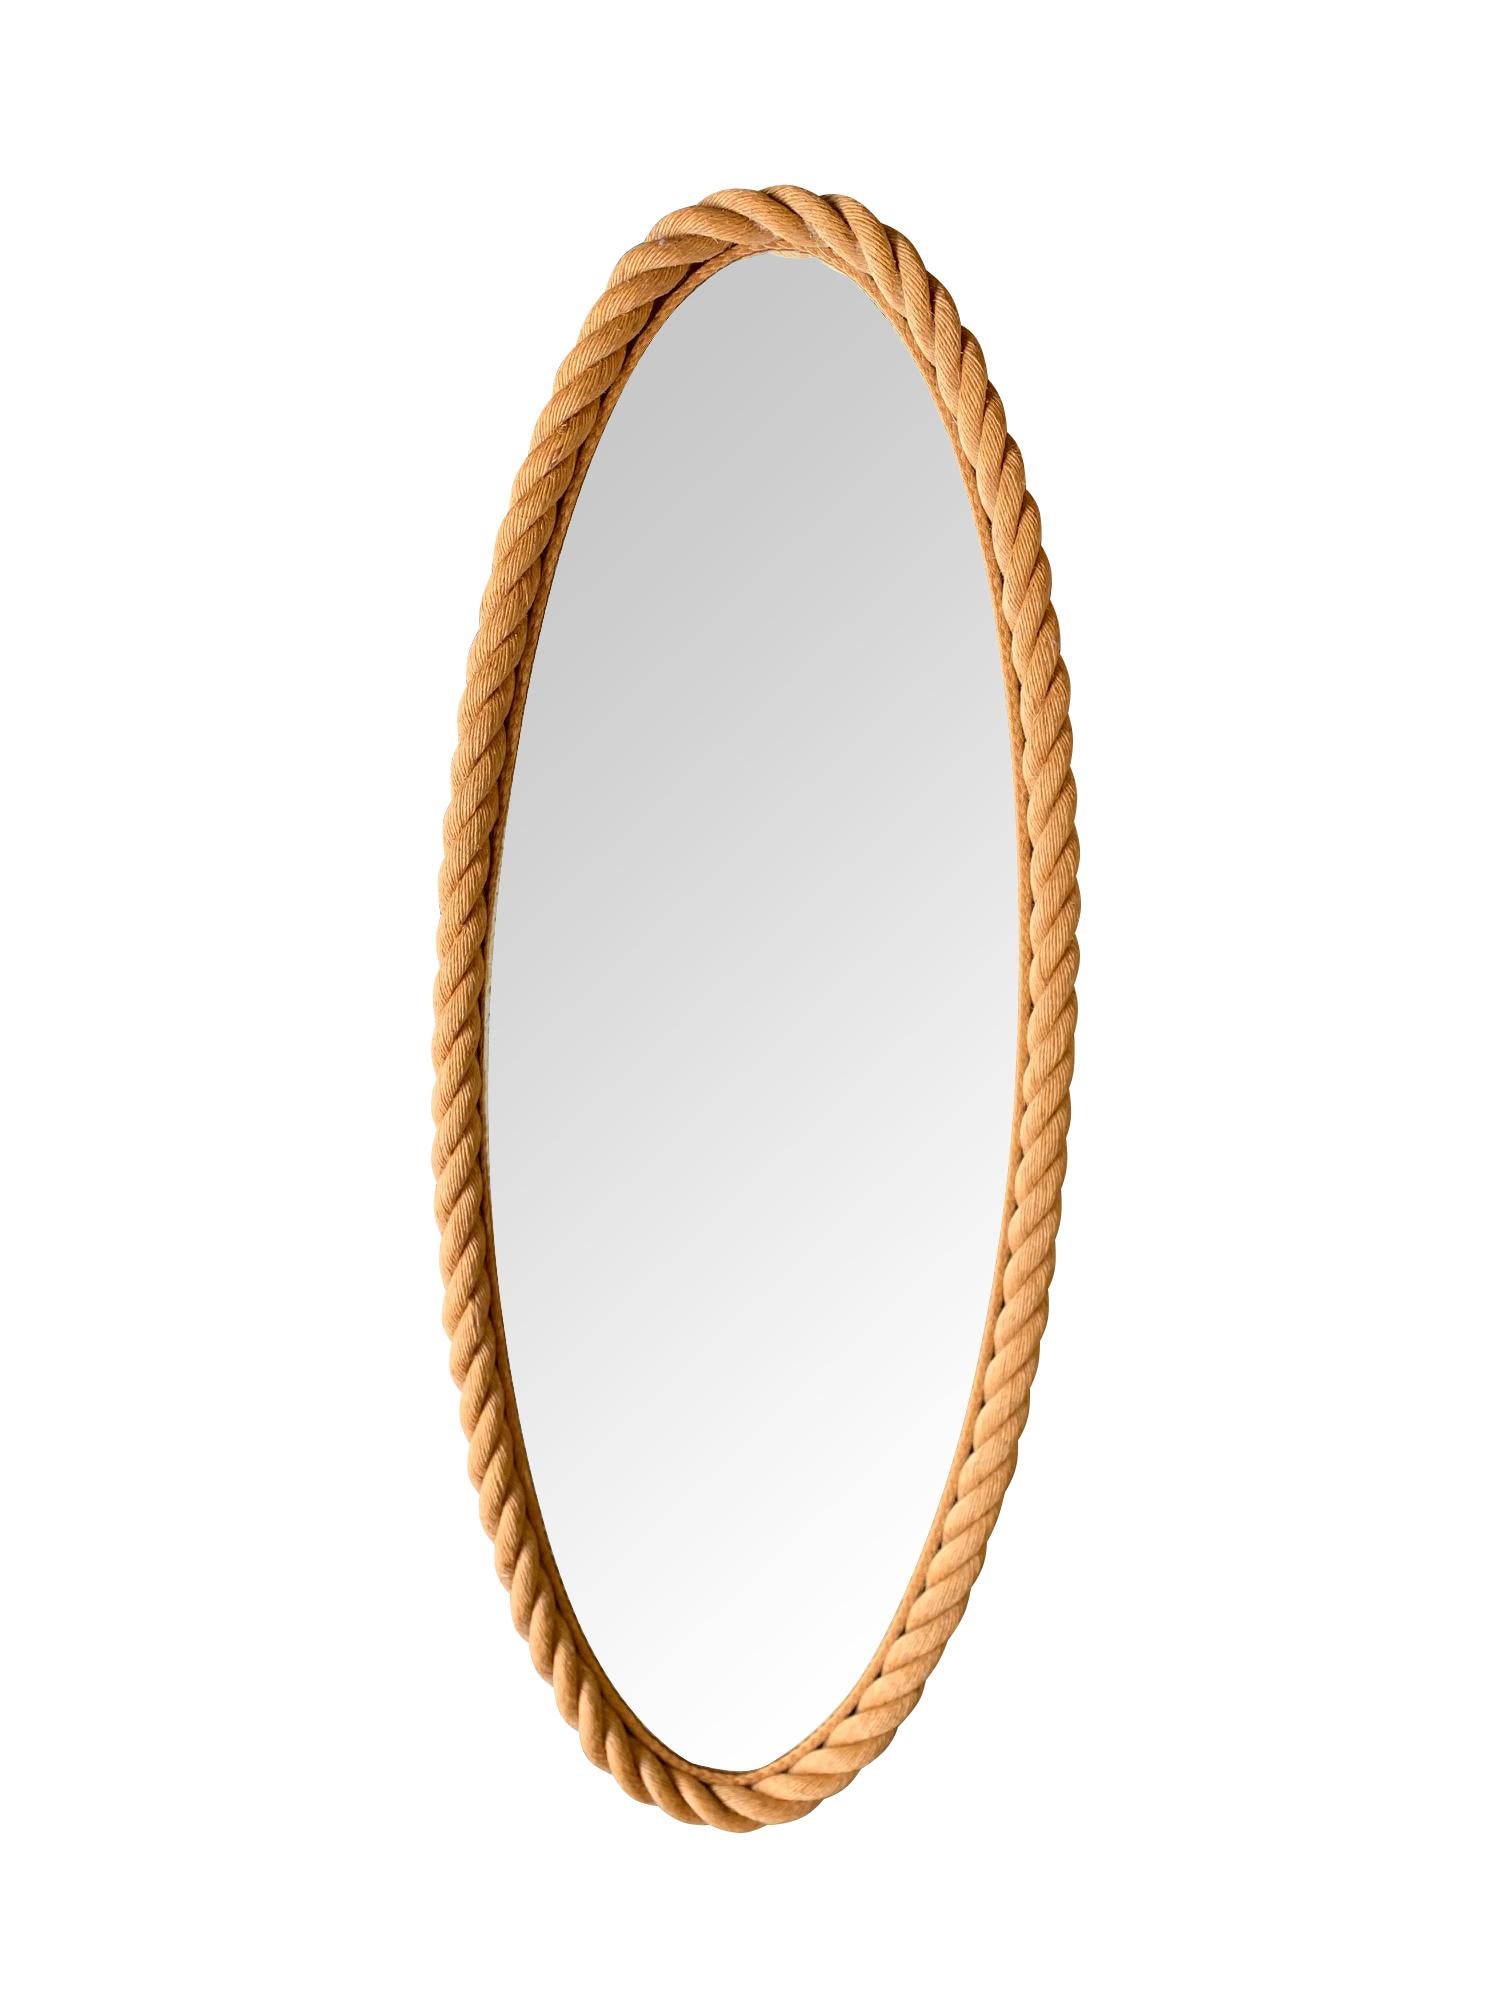 A Large 1950s French Riviera Oval Rope Mirrors by Audoux and Minet 4